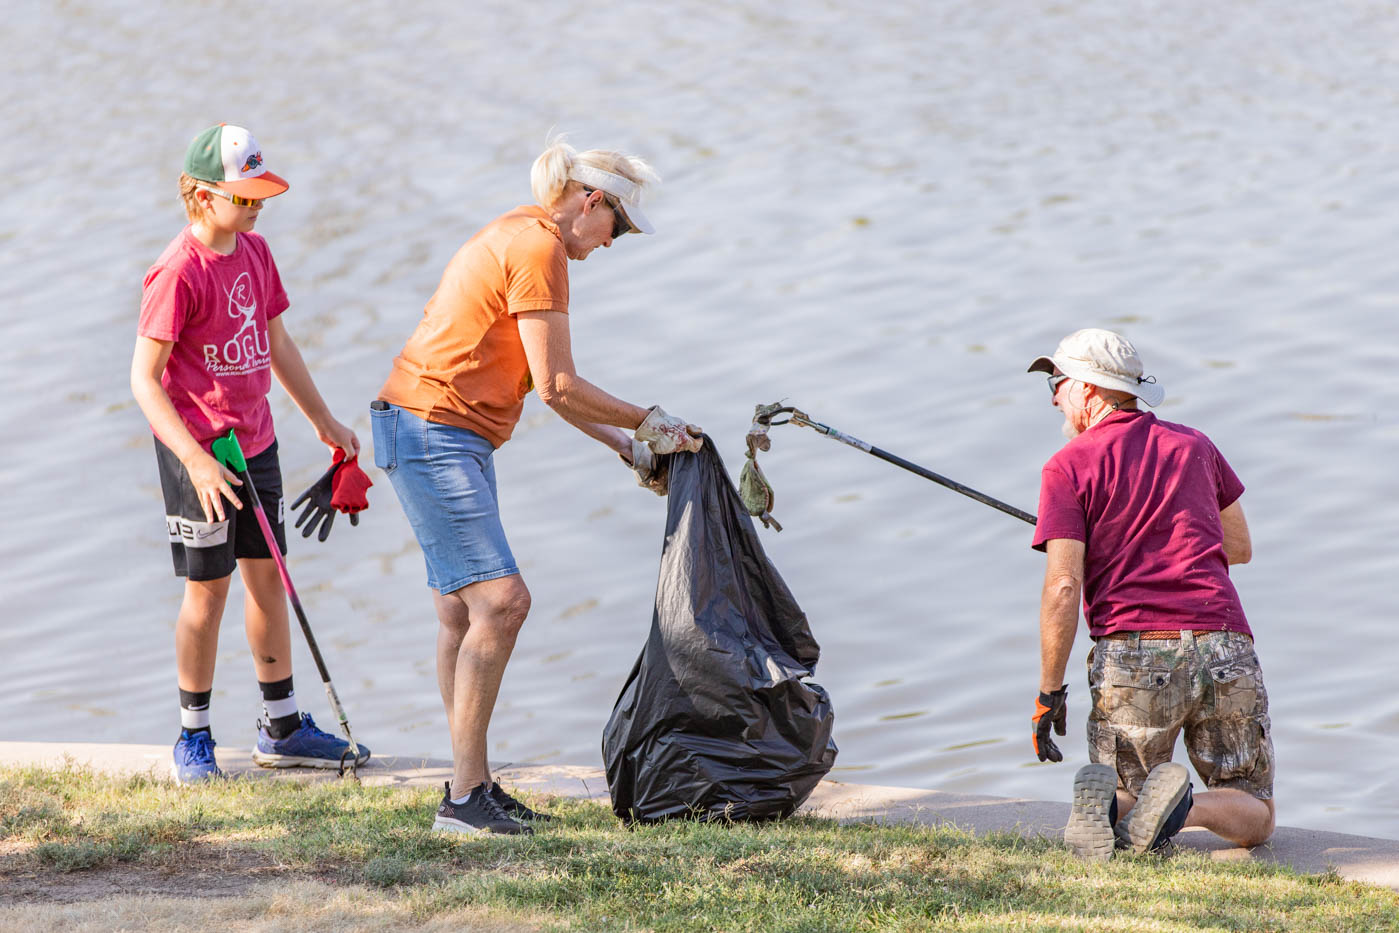 Debbie and Jim Sims pick up trash from the River on Sept. 9 during the Wichita Clean Streams event. The Sims attended the event with their grandson, after seeing an ad through the Wichita Windsurge.